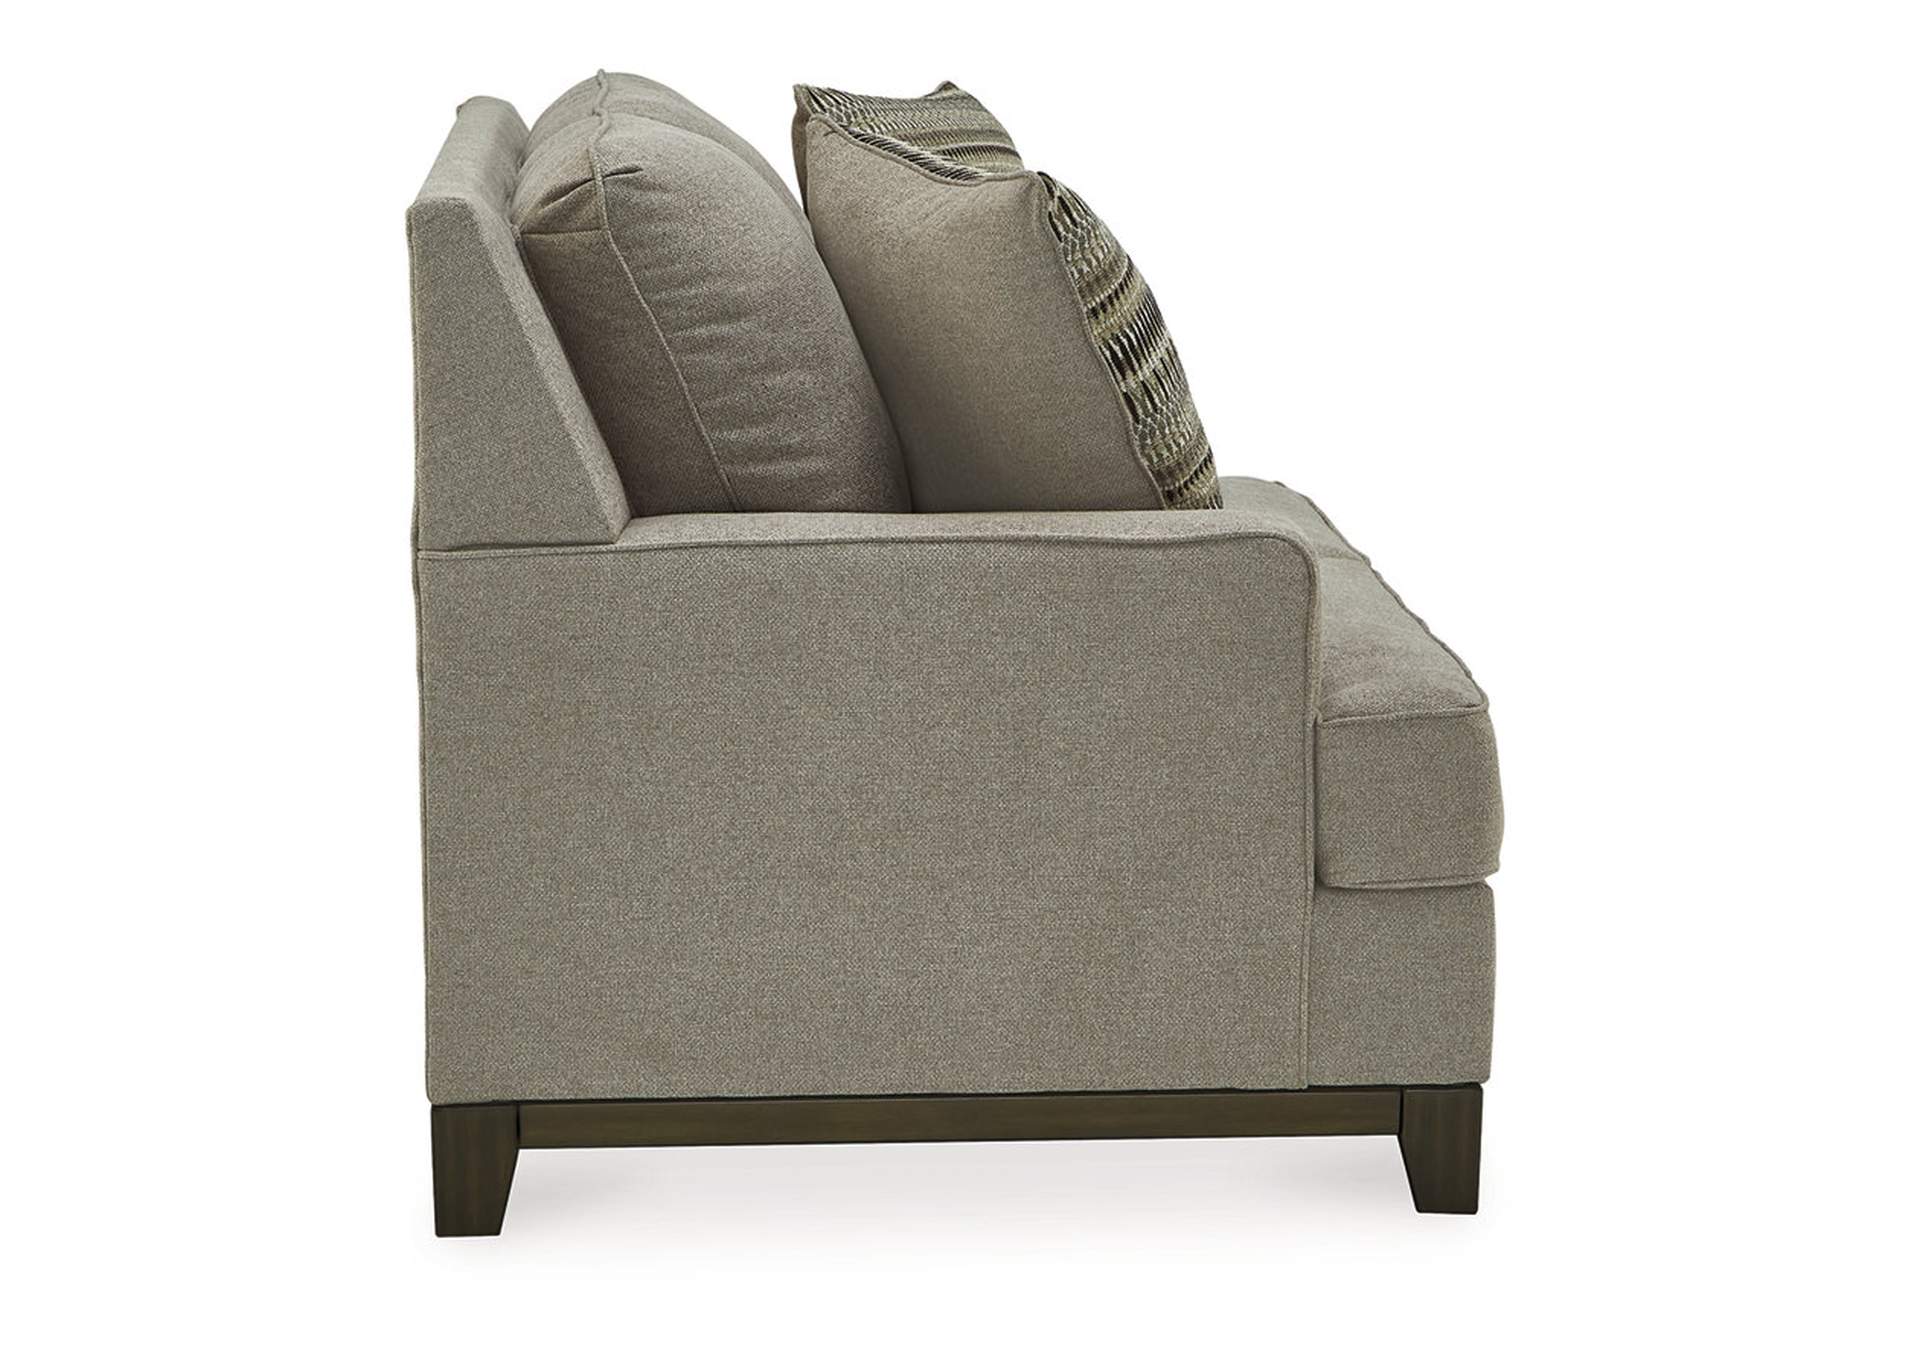 Kaywood Sofa, Loveseat, Chair and Ottoman,Signature Design By Ashley